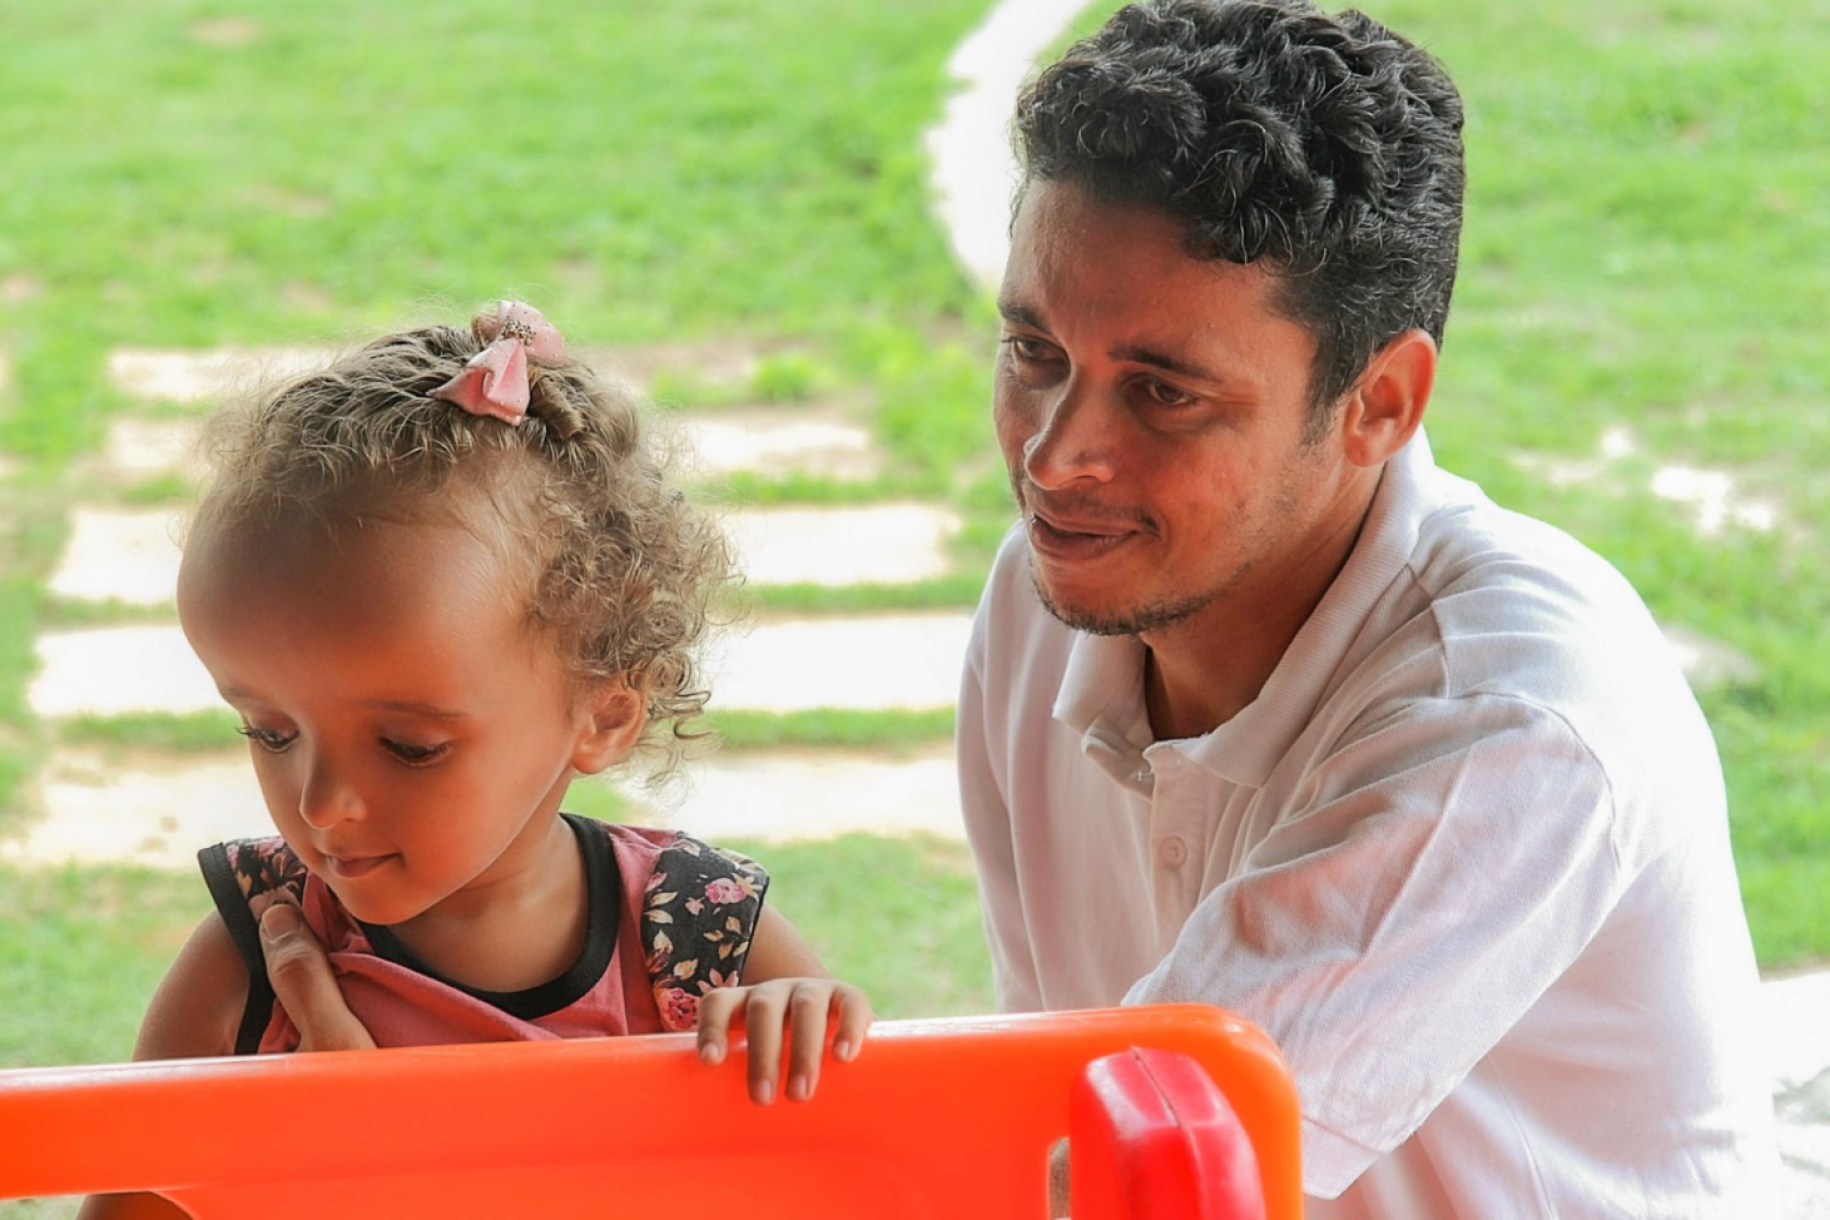 A man and a child look at an orange toy together in an outdoor space.